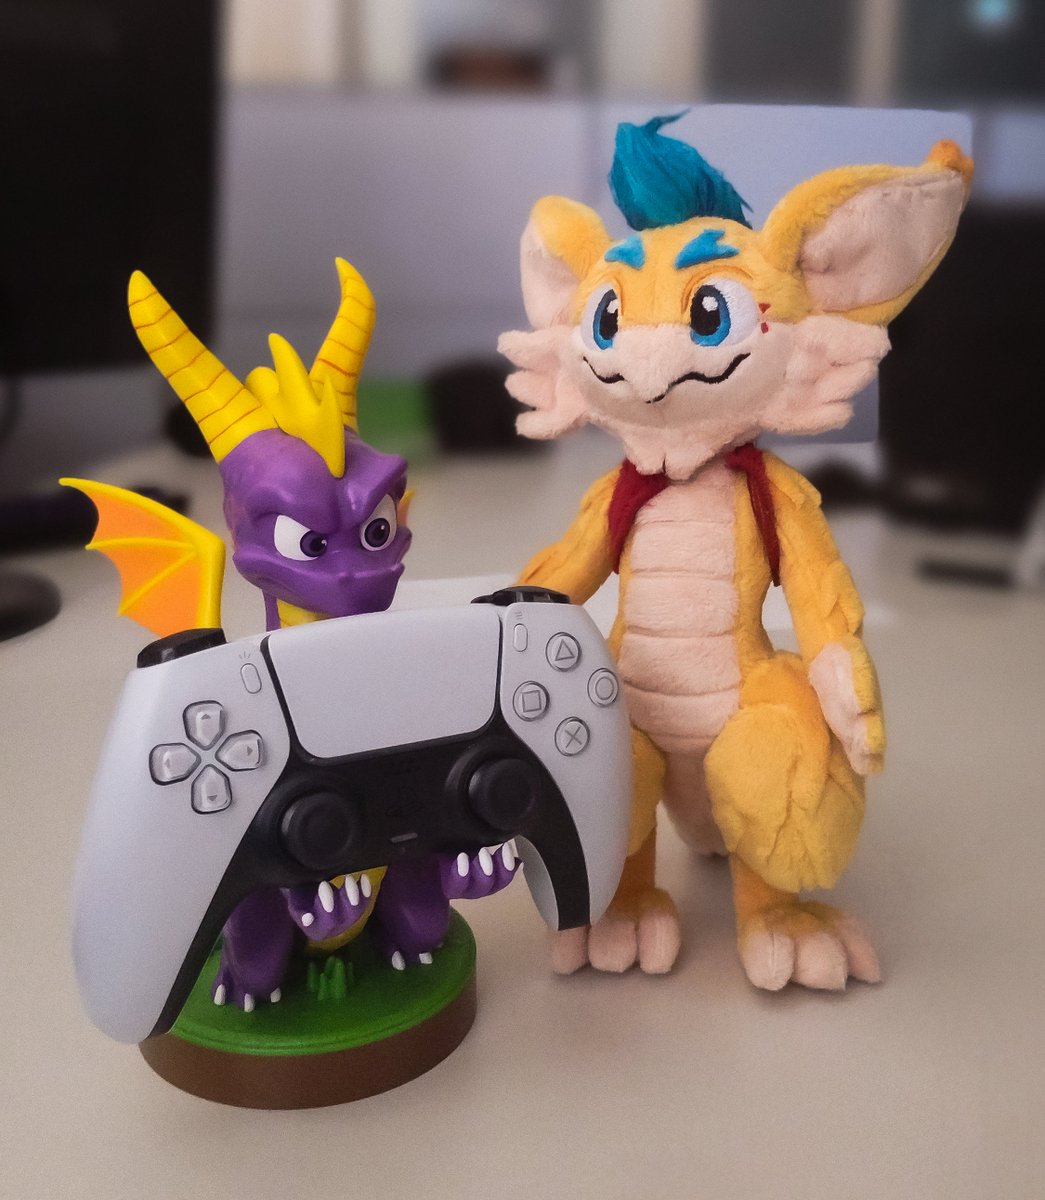 Longtail about to play games with one of his role models. ✨

#gamedev #3Dplatformer